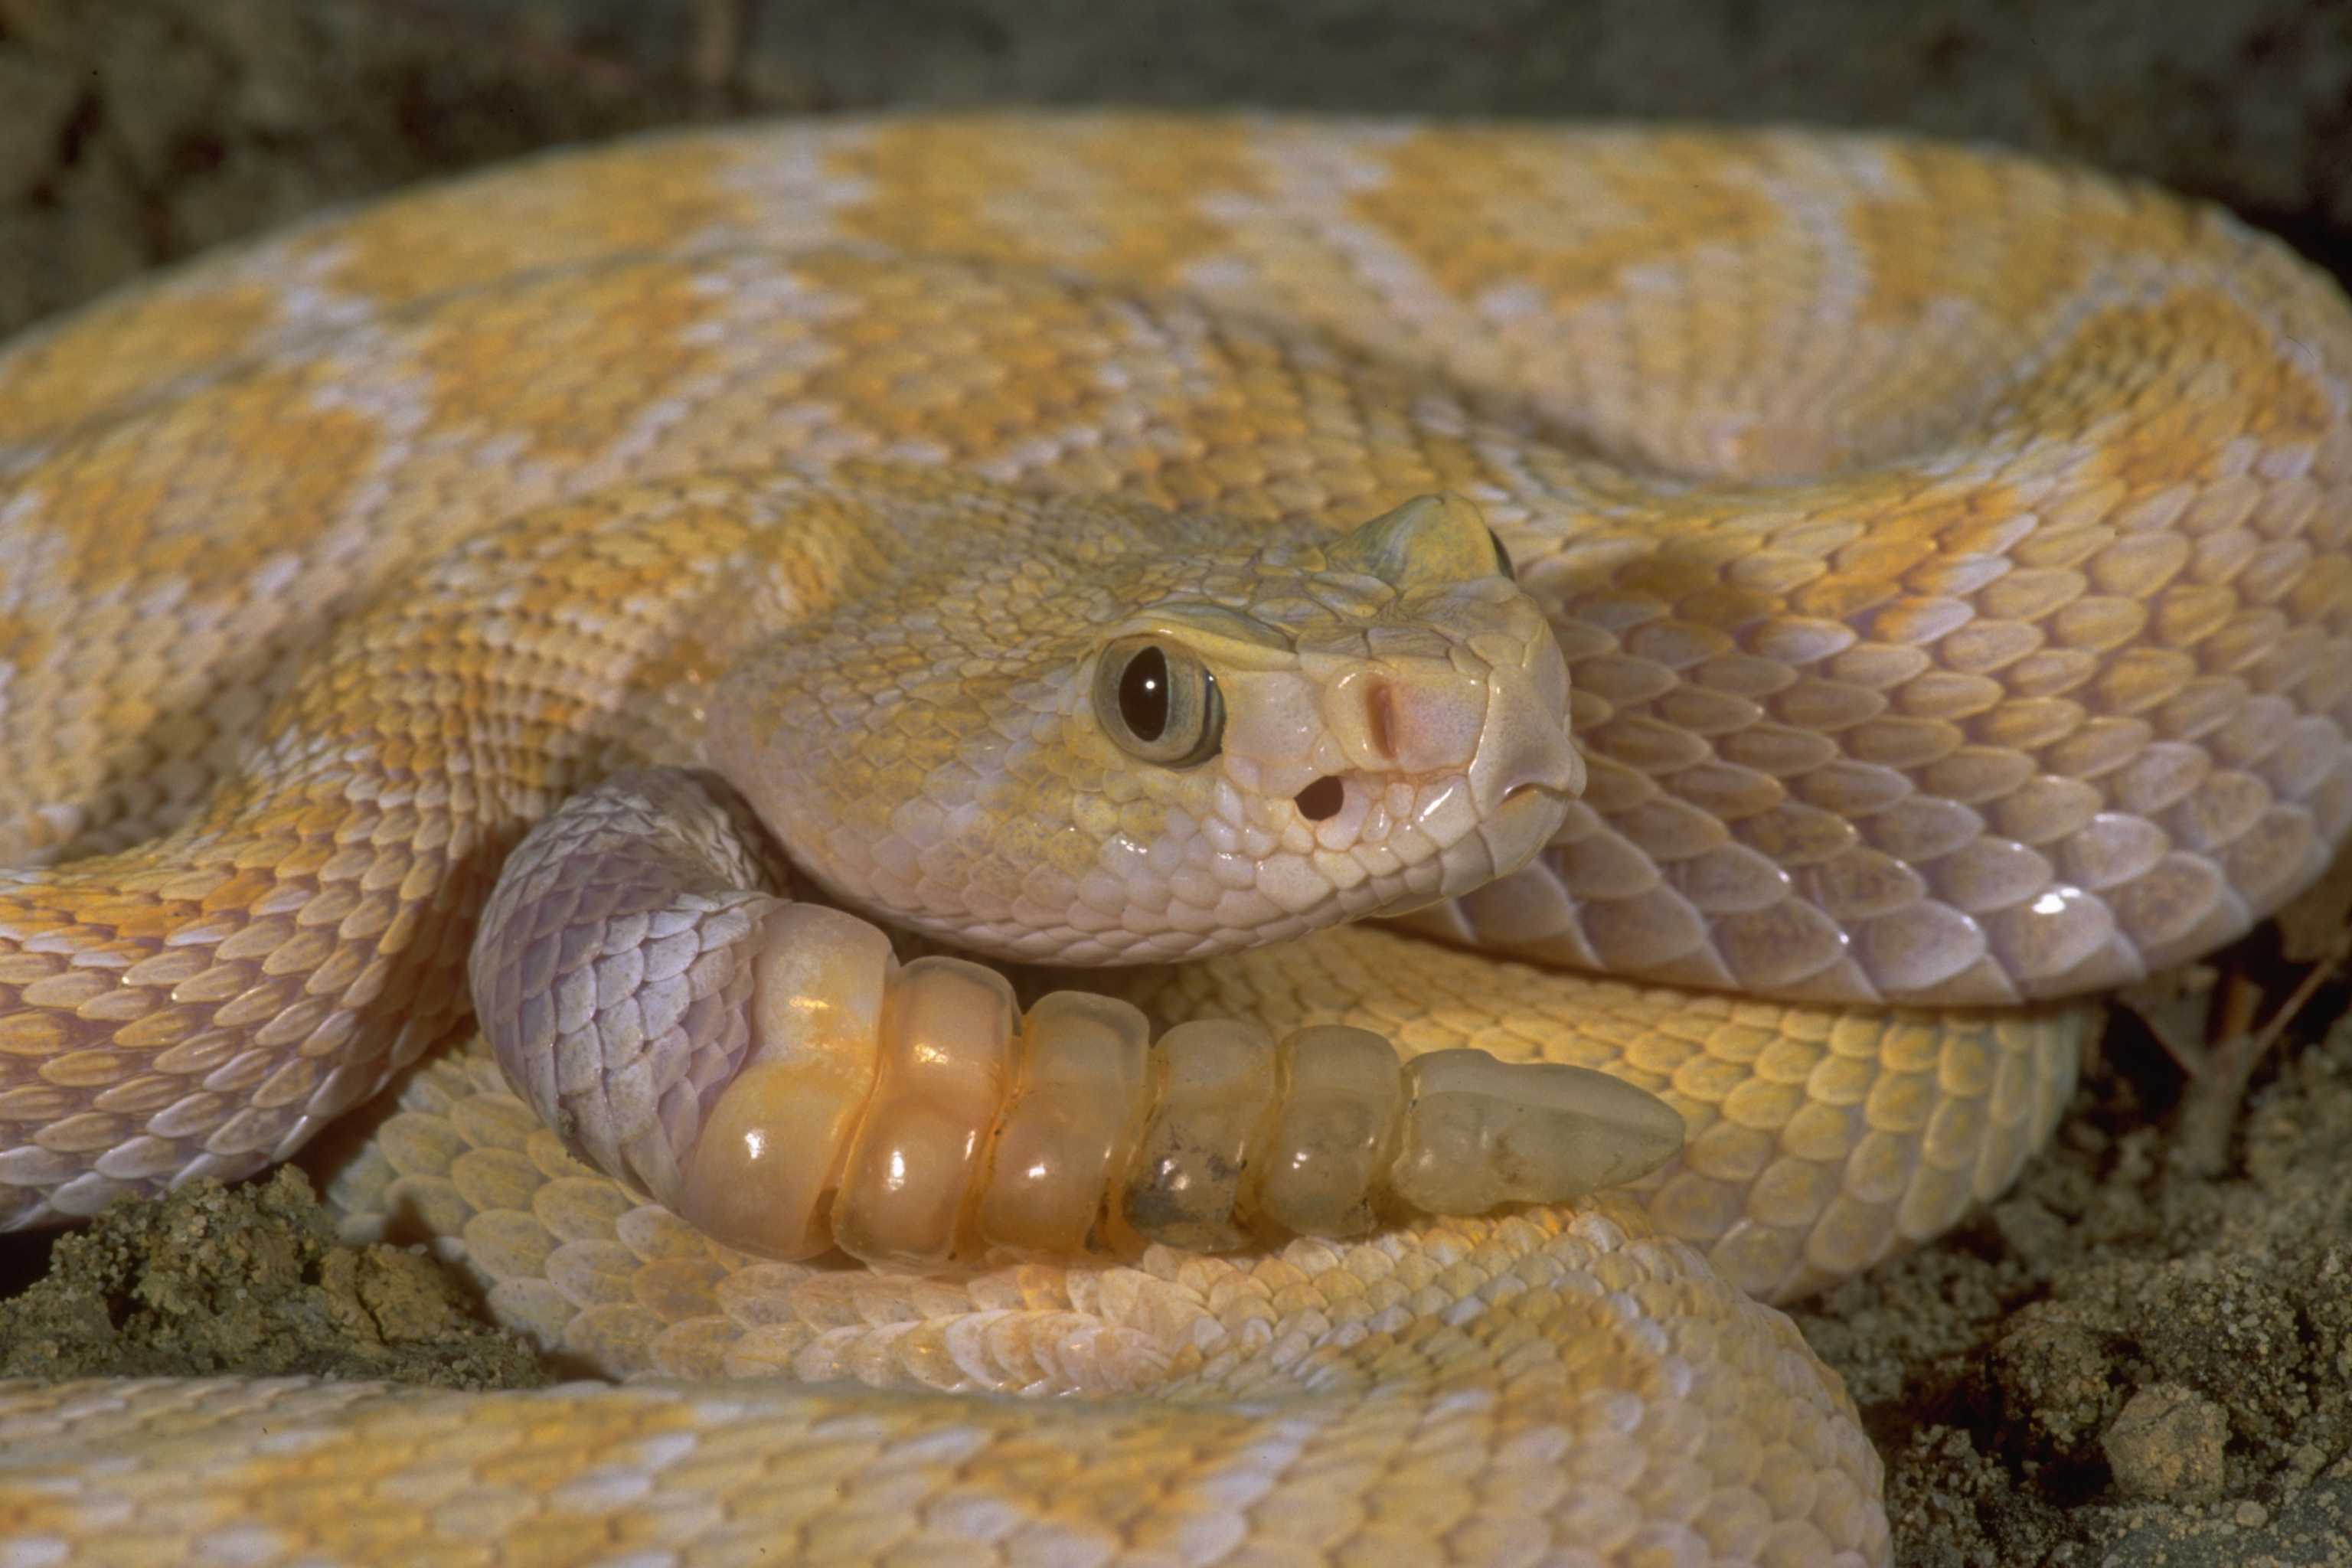 3072x2048 Rare Albino Rattlesnake Discovered on Farm Might be 'One in a Million'